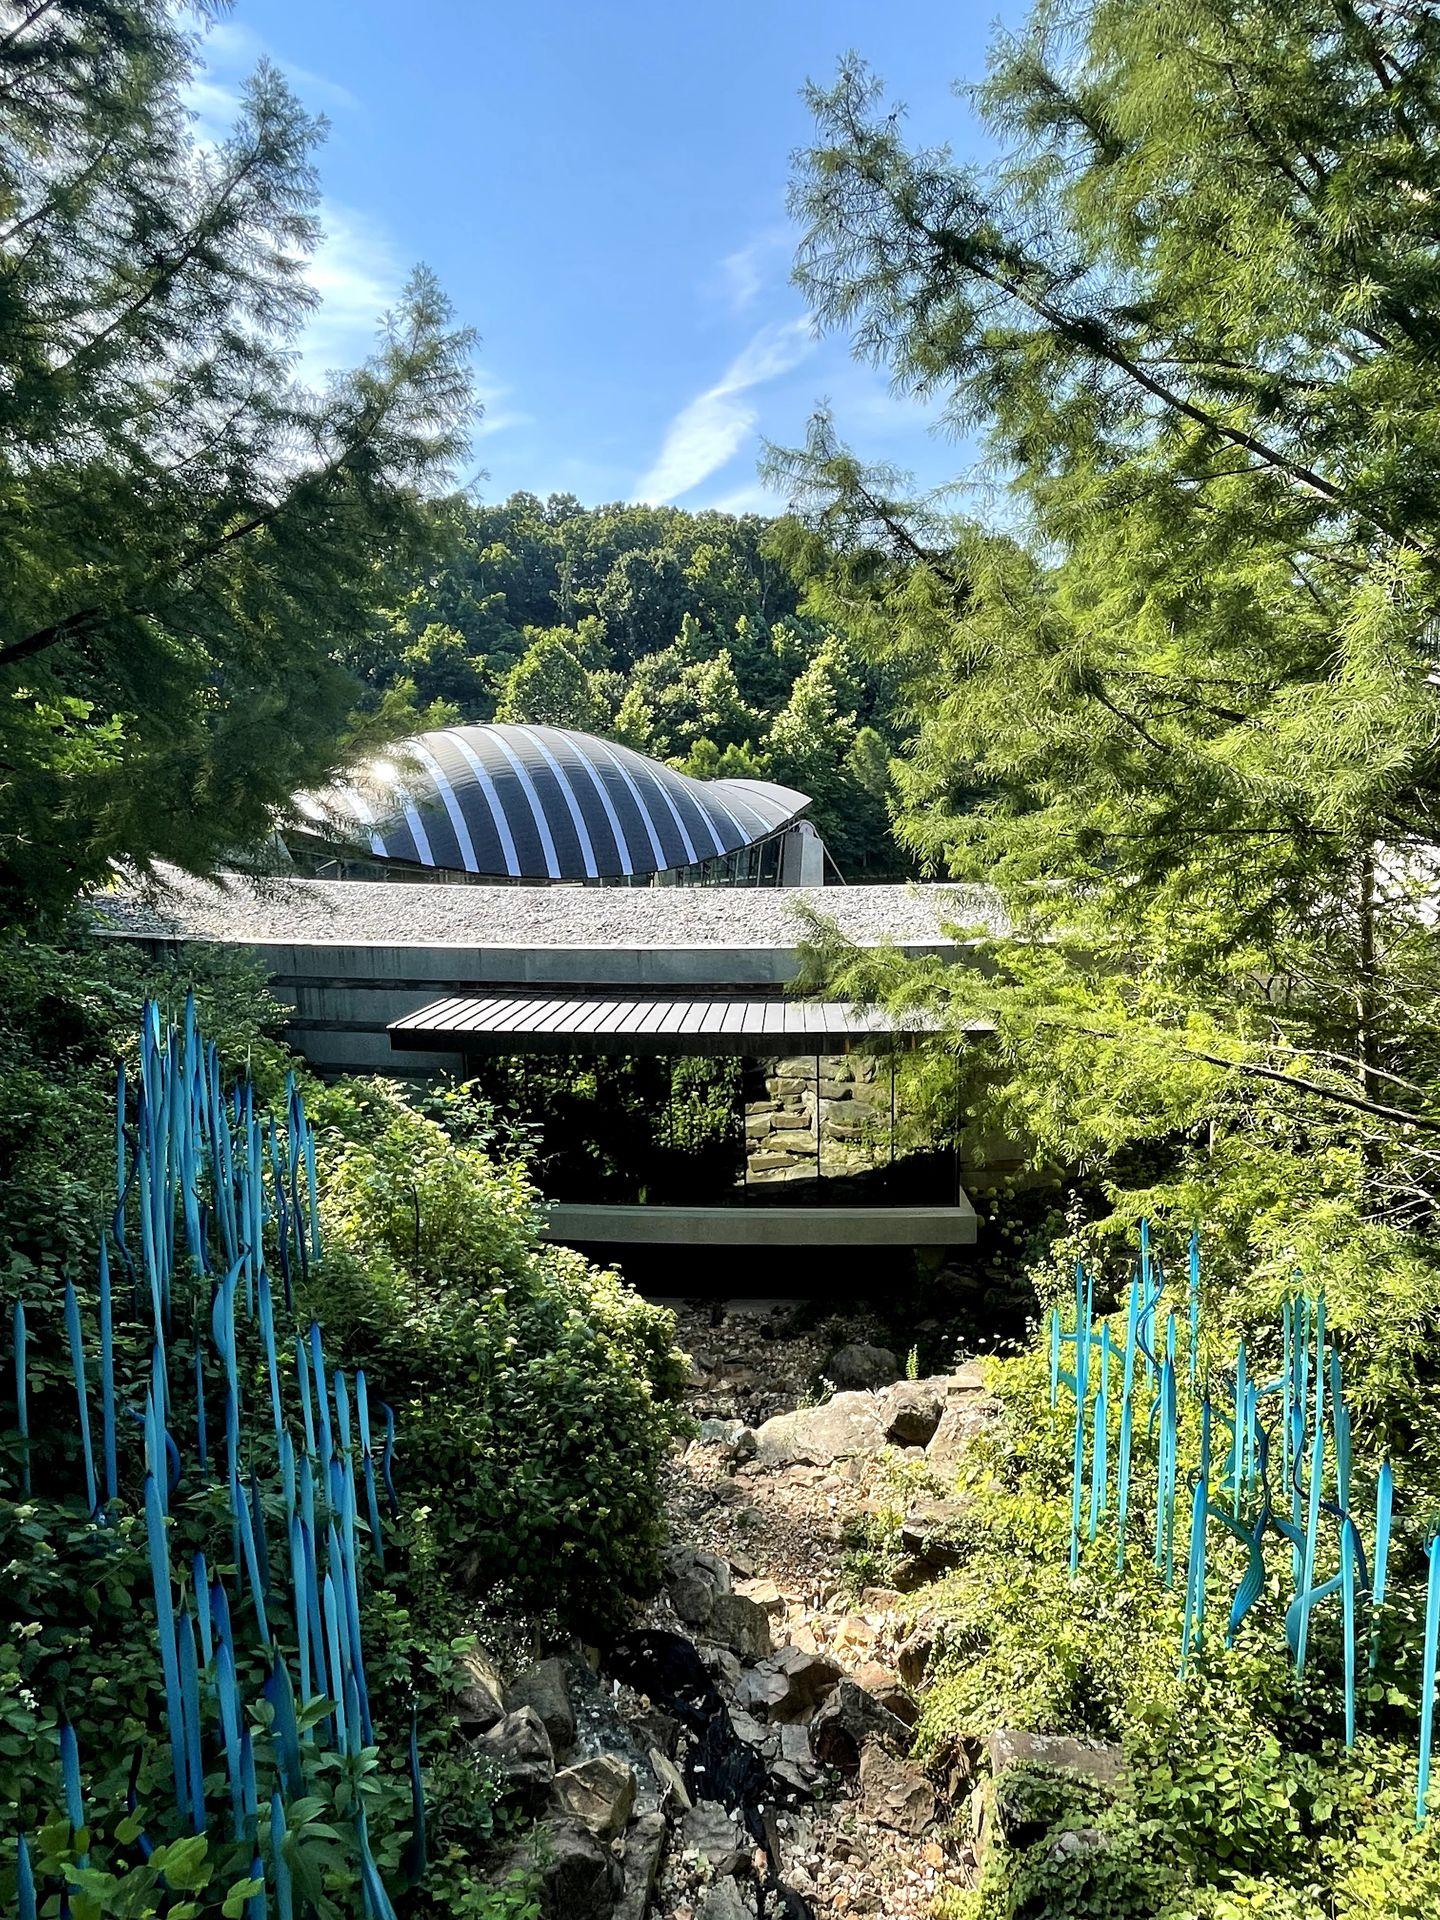 The exterior of Crystal Bridges. The building is a dome and surrounded by trees. There are glass, blue sculptures in the foreground.